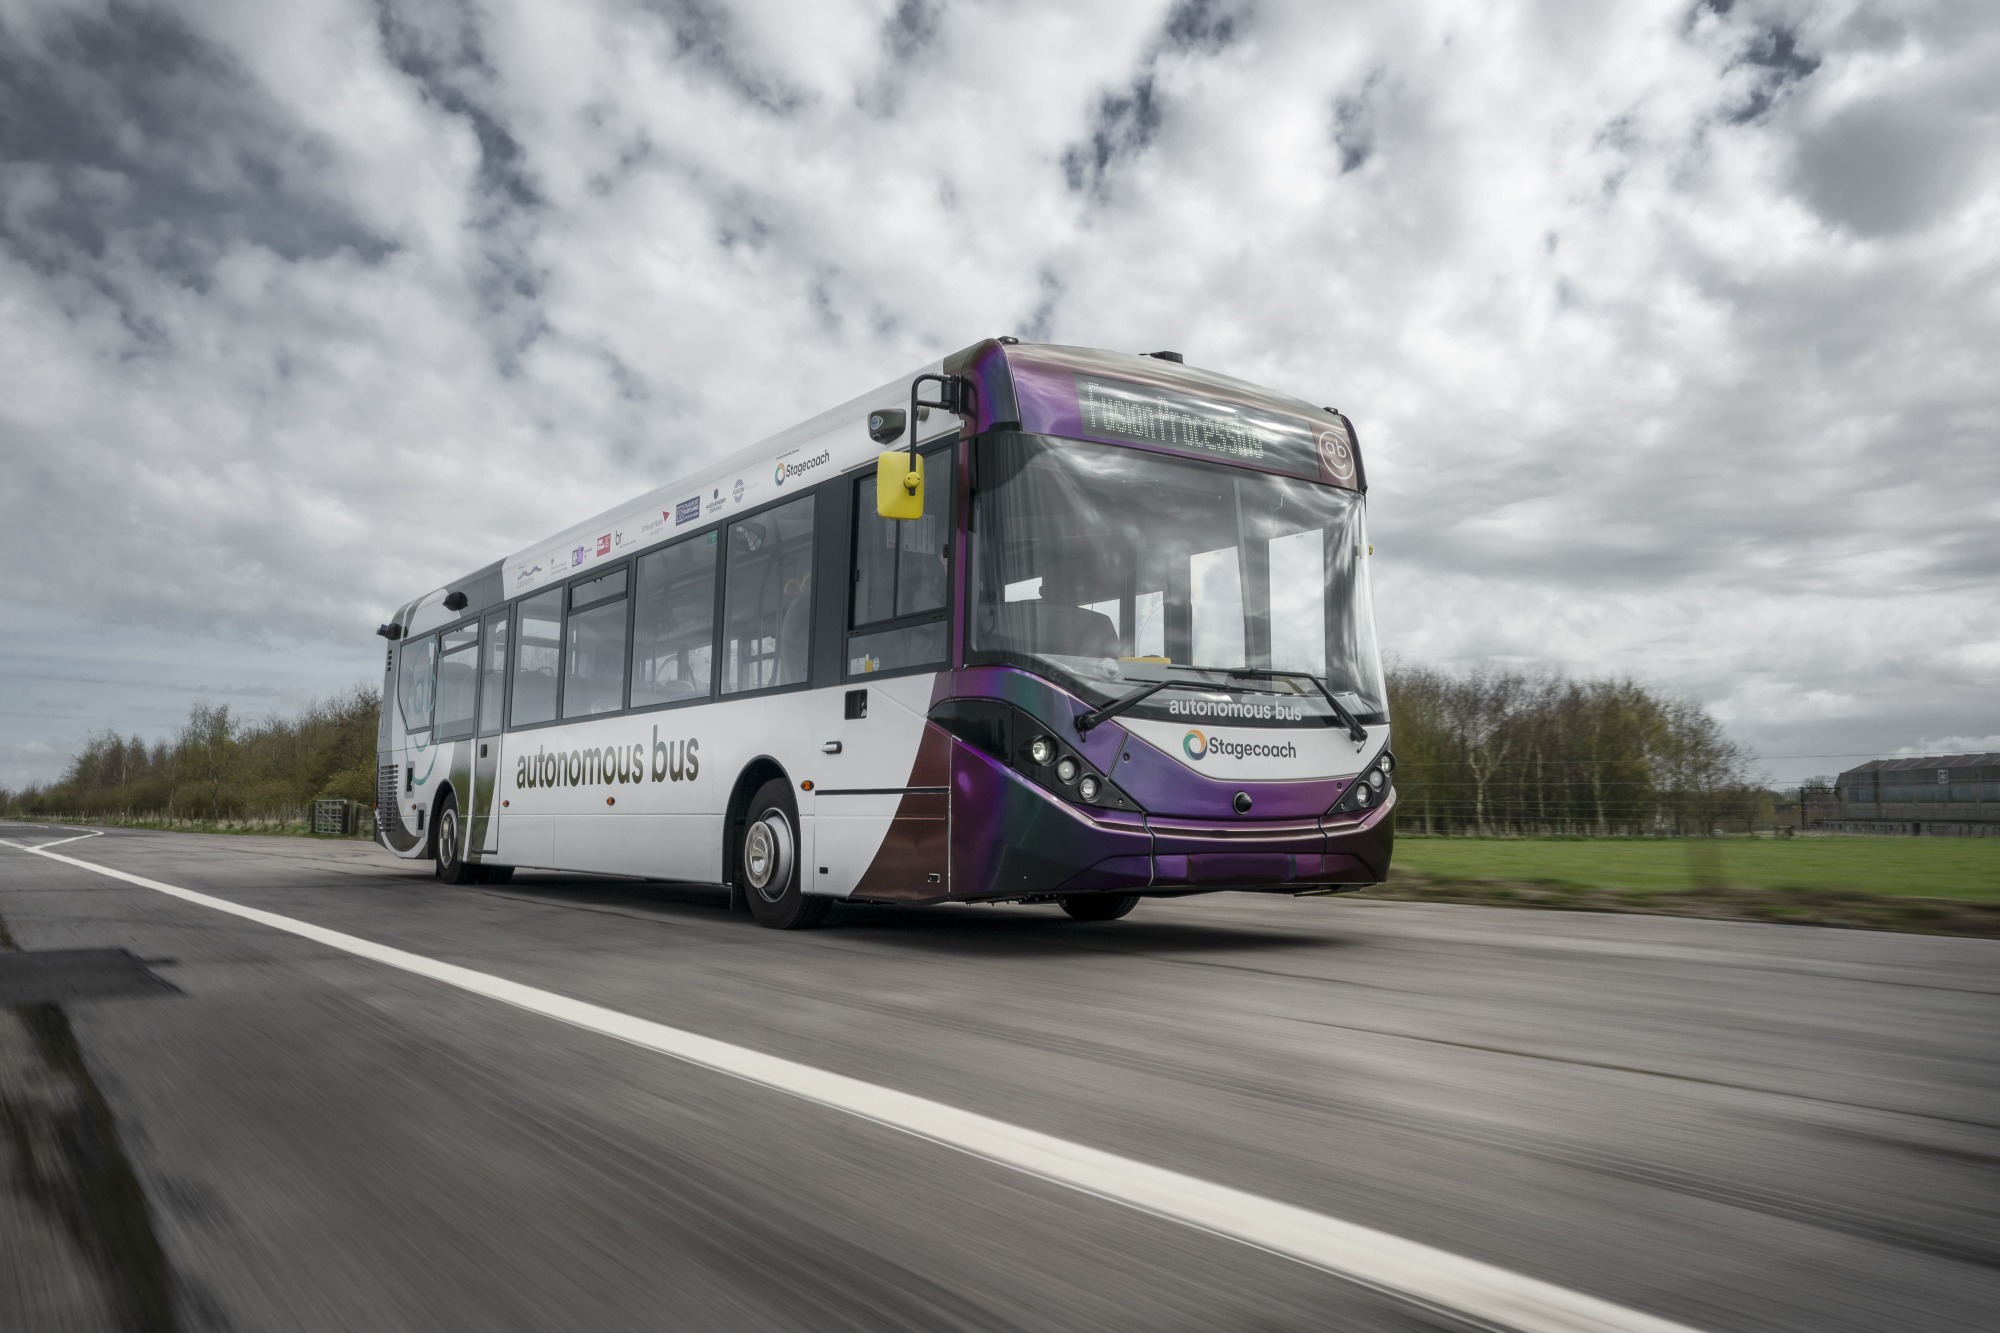 UK's First Self-Driving Bus Launches